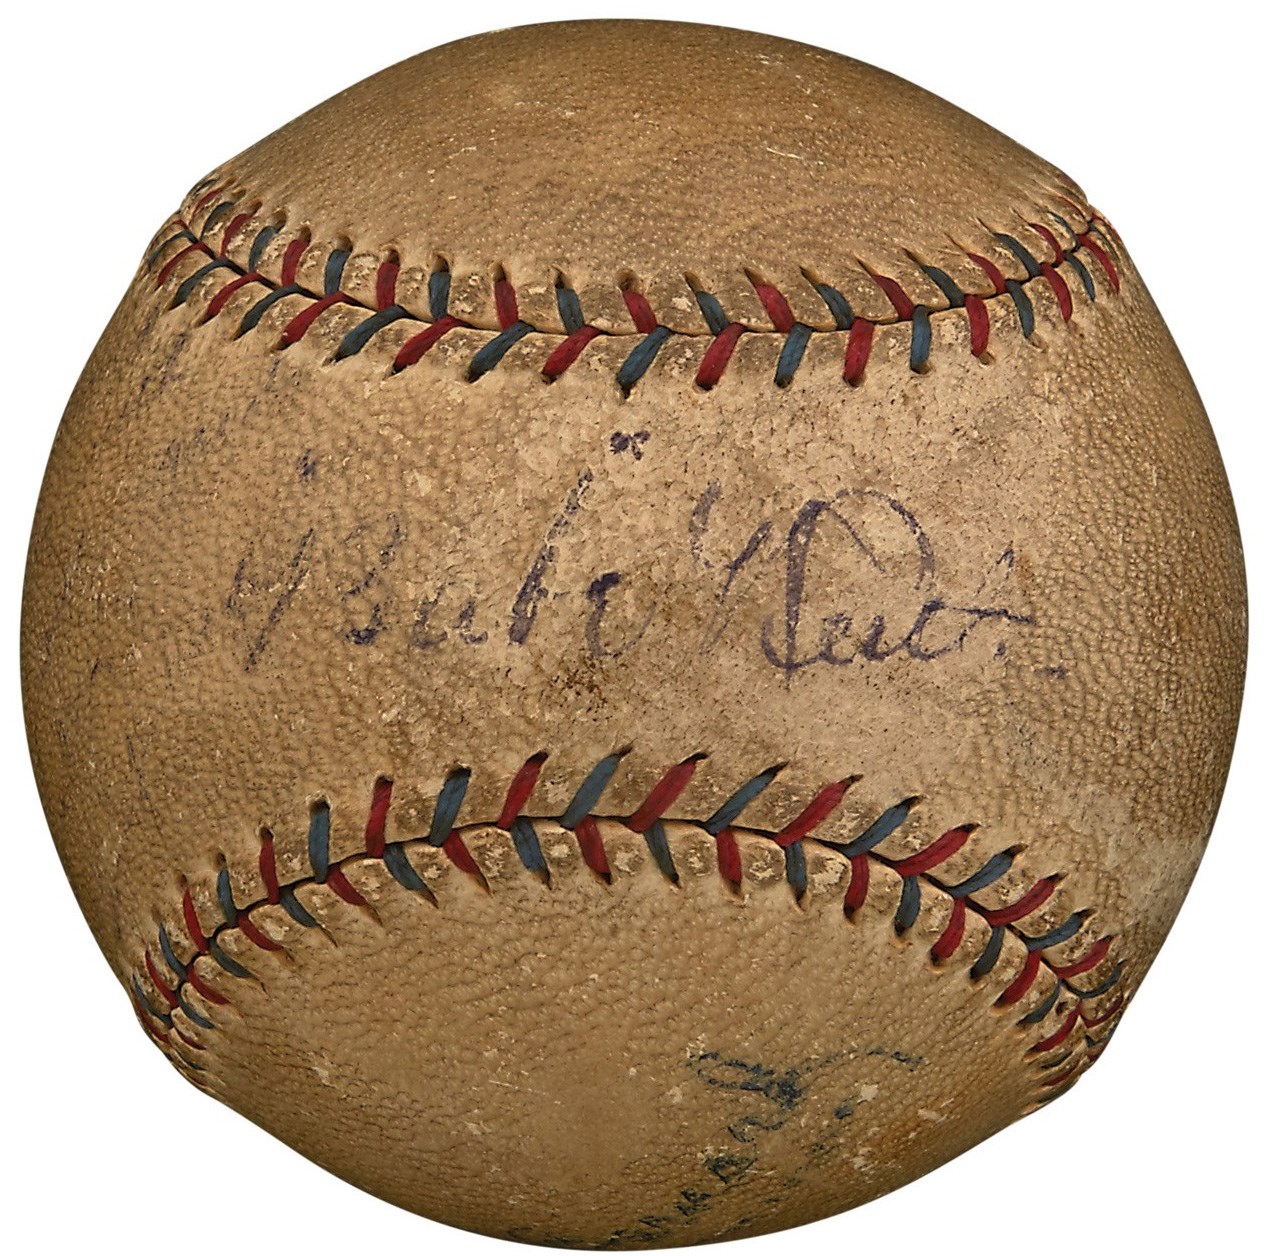 1928 Babe Ruth and Lou Gehrig Dual-Signed Reach Baseball (PSA)